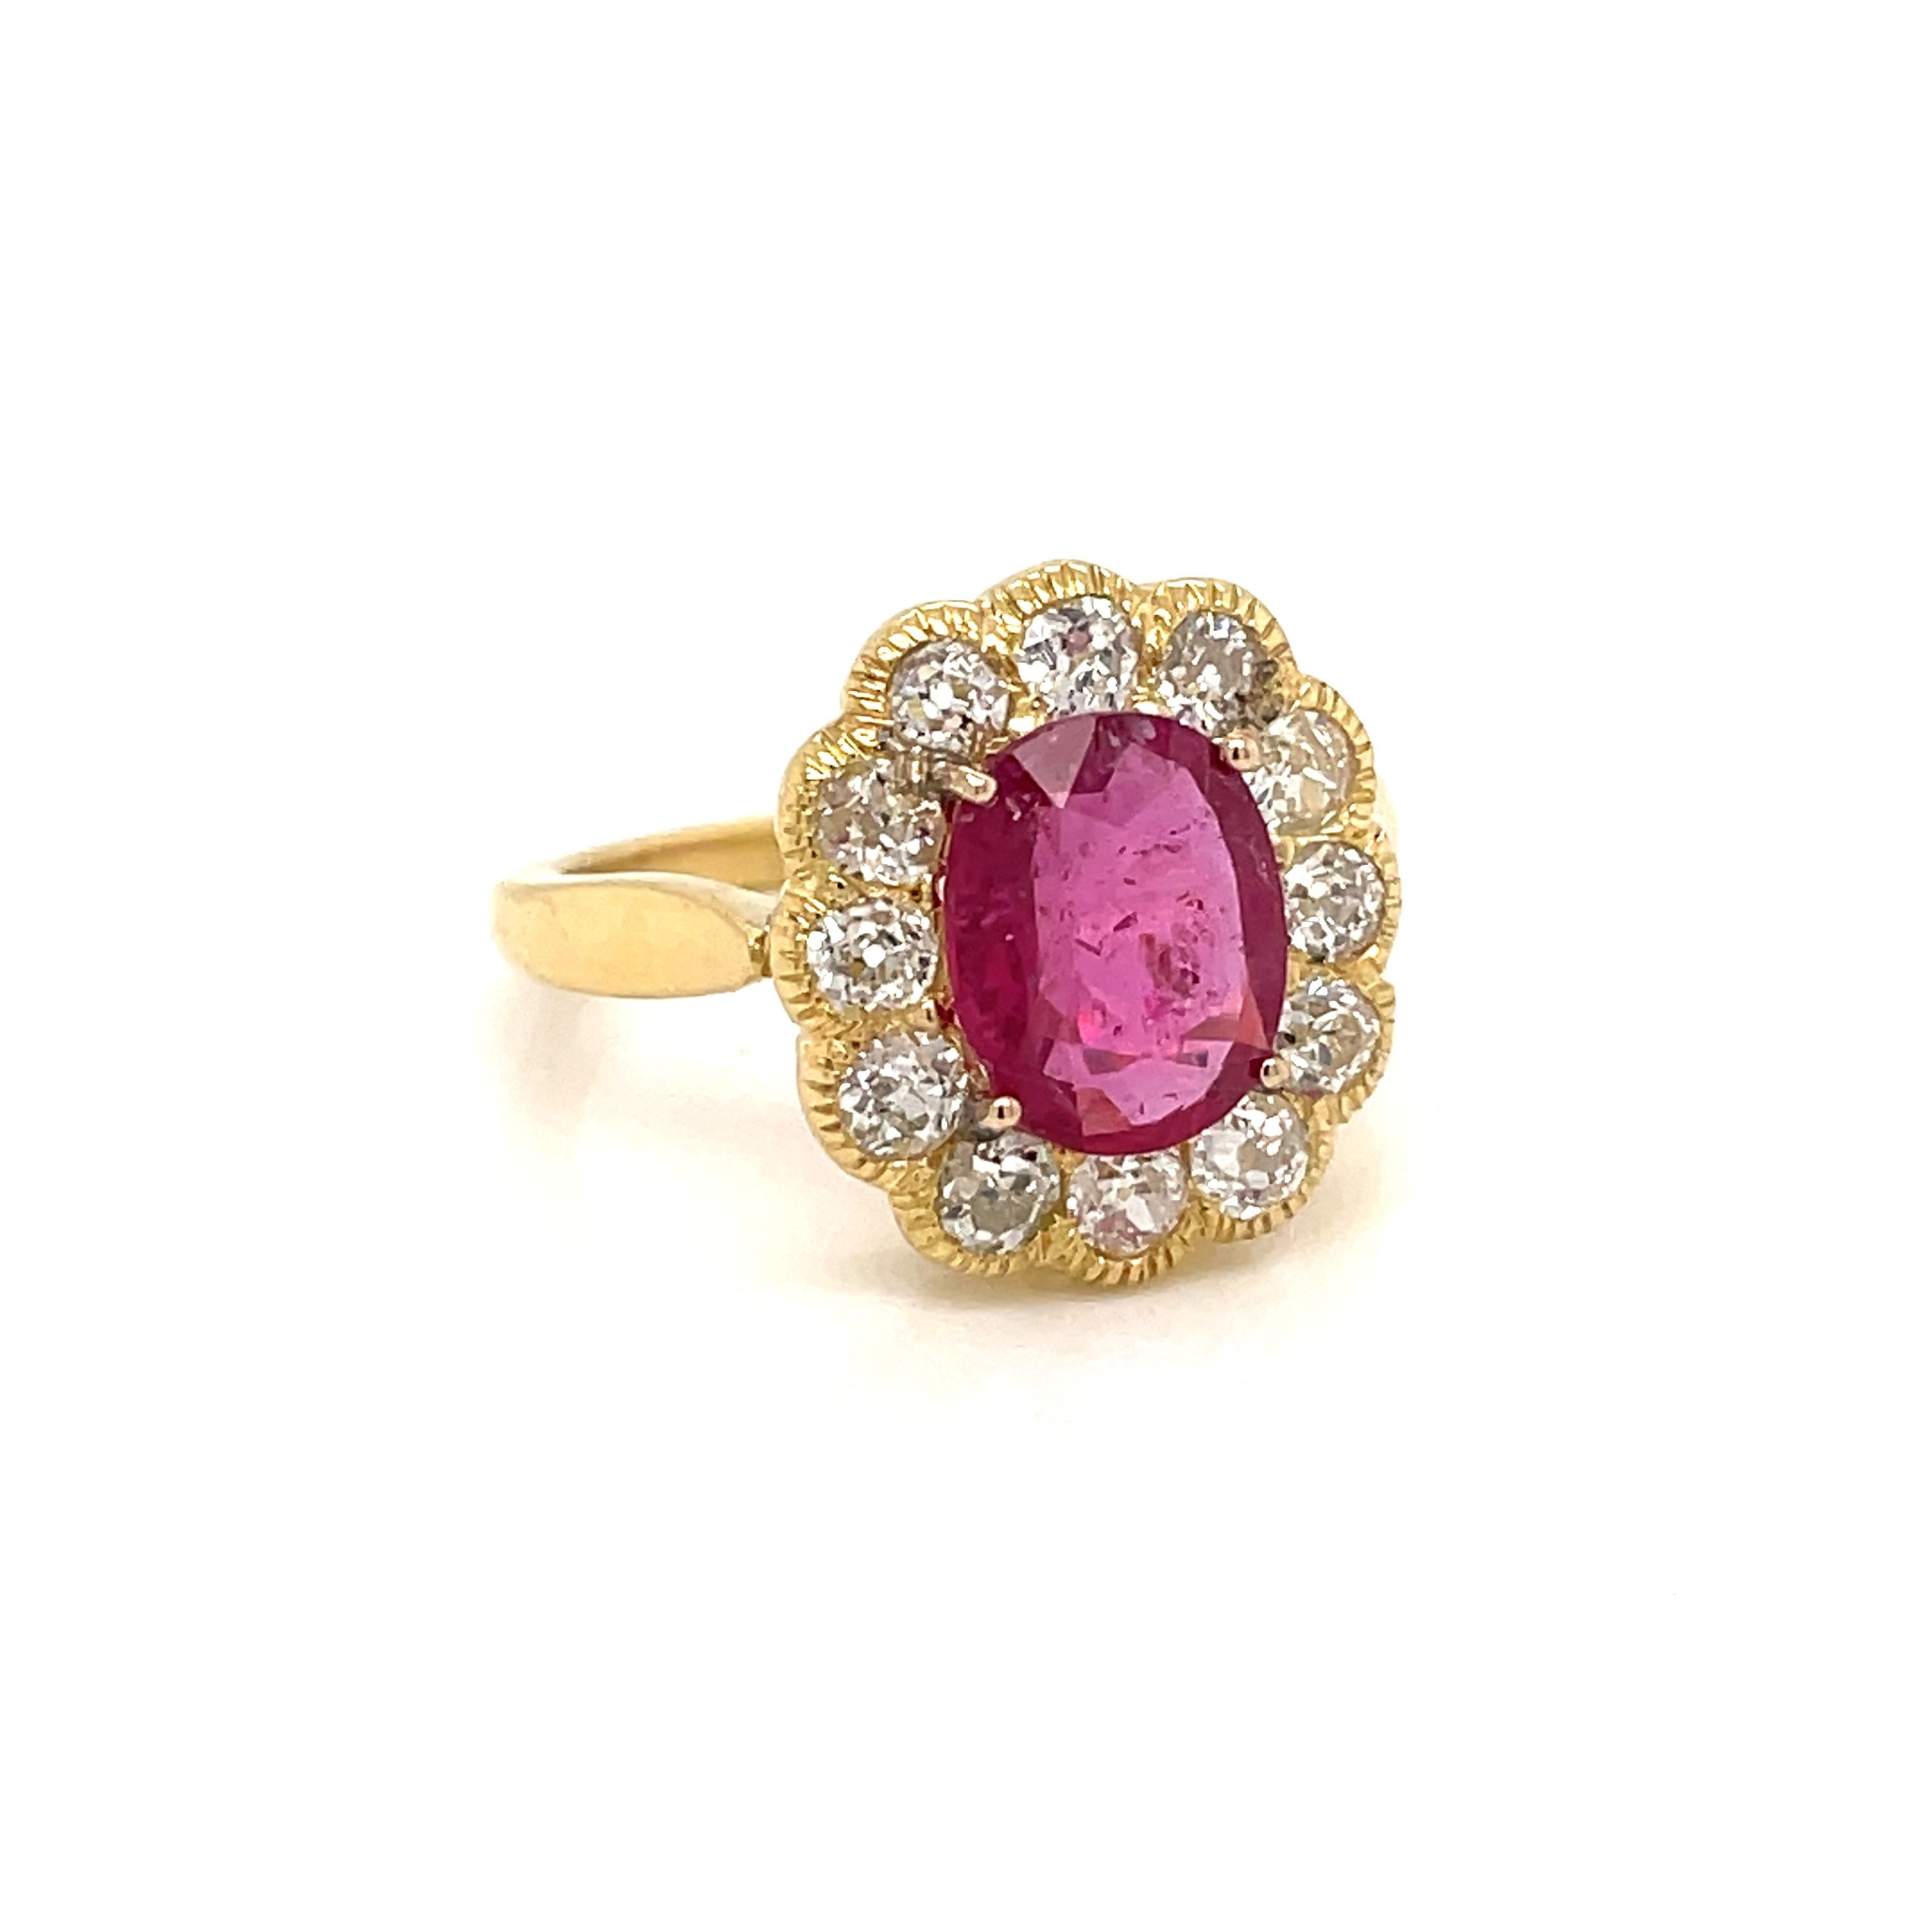 Antique 18K rose Gold Ruby and Diamond ring. 
The cluster style ring is centered with an approximately 2.50 carats stunning oval ruby, Thailand origin, accented by an halo of sparkling old mine cut diamonds weighing approx. 1.80 carats total. 
Late